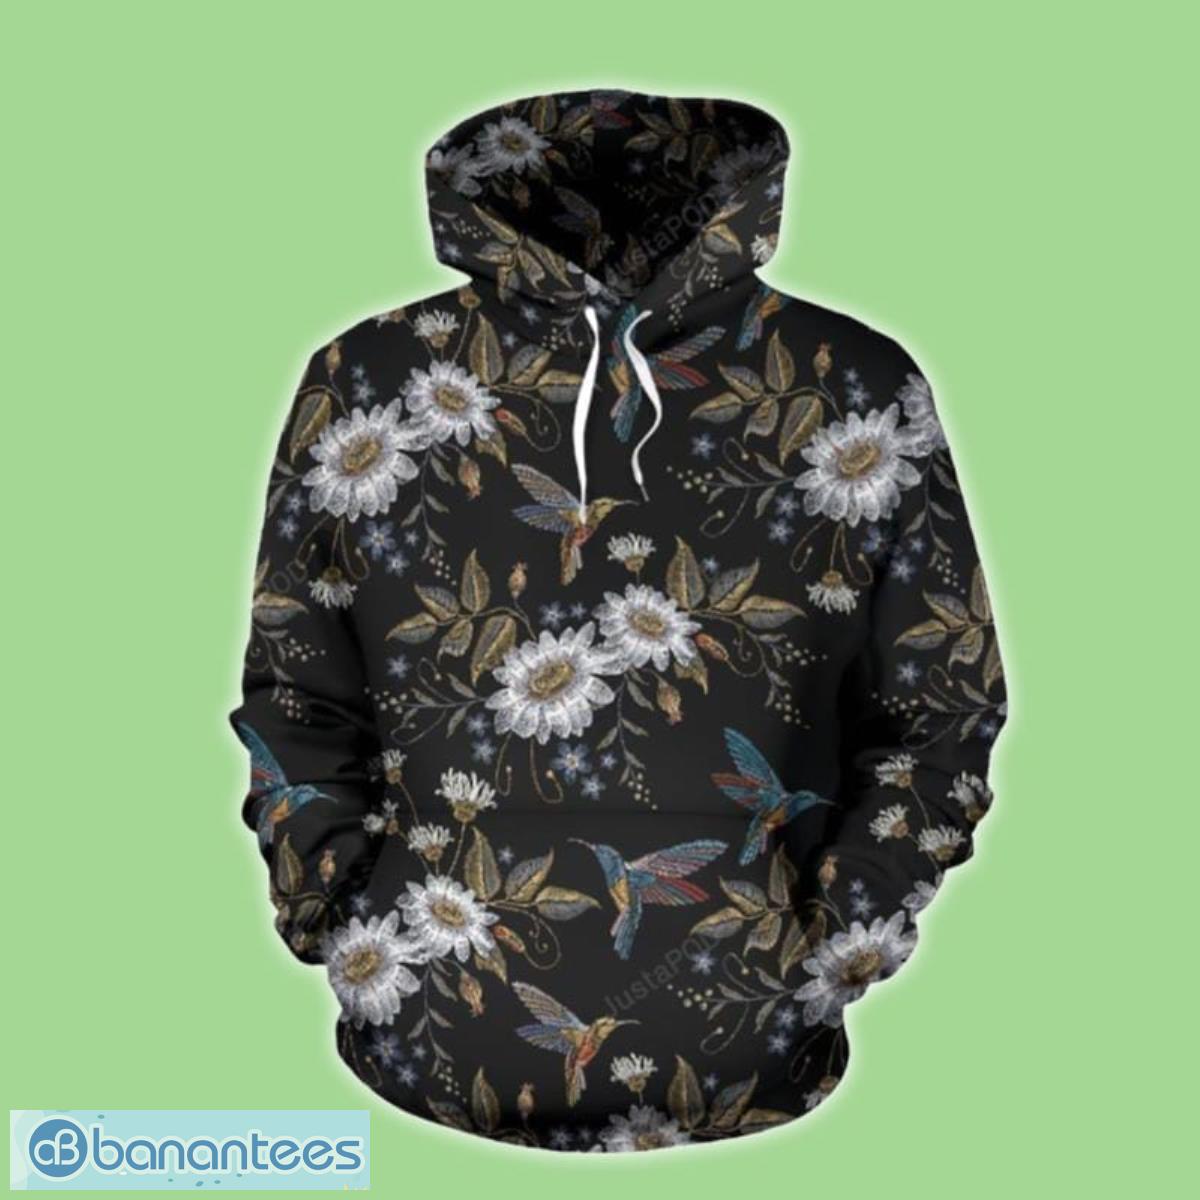 Hummingbird With Embroidery Themed 3D Hoodie Unique Gift For Men